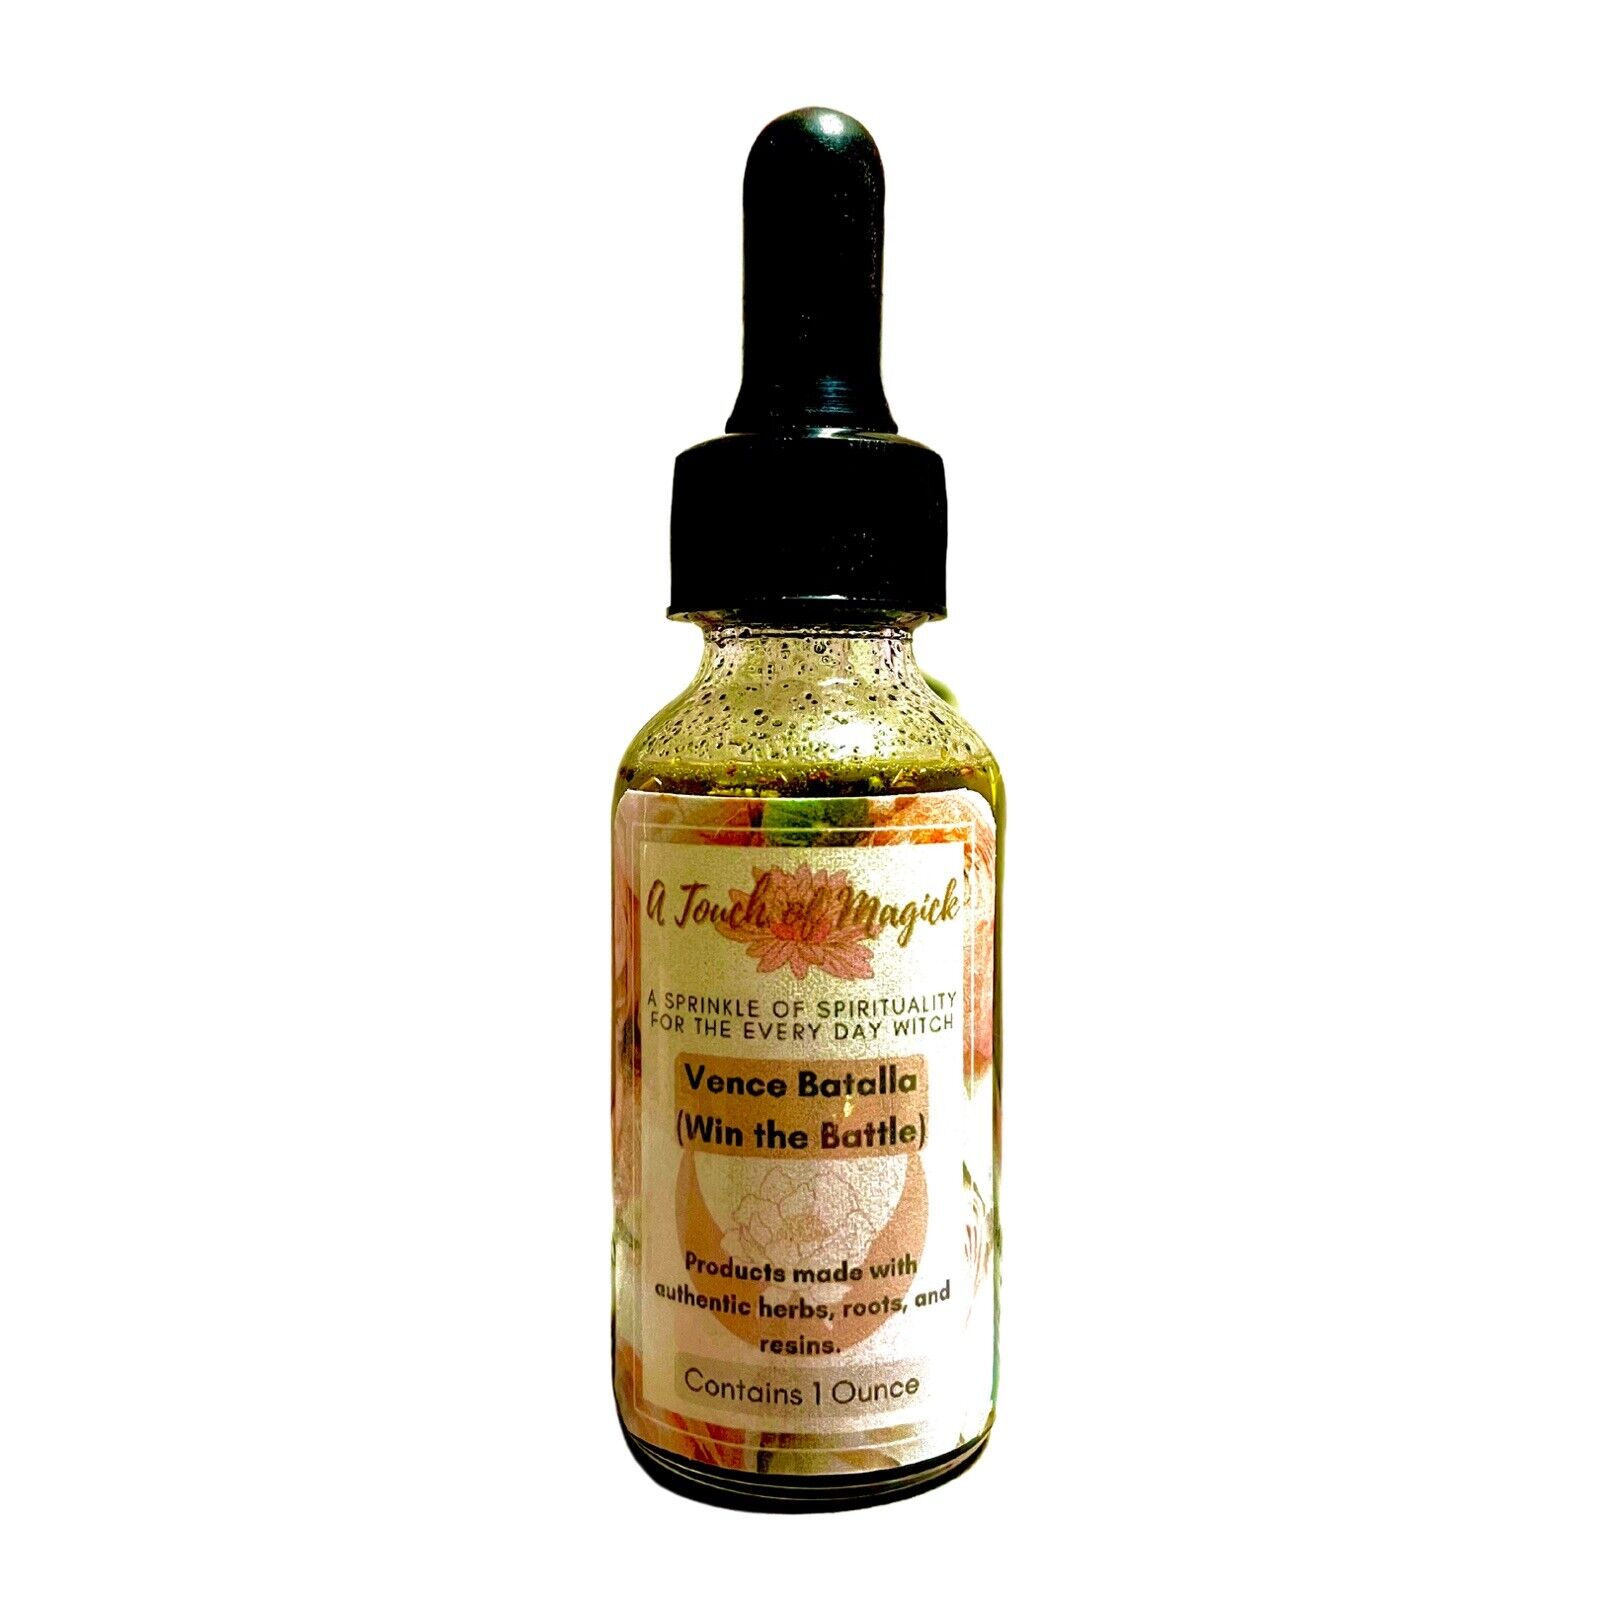 Vence Batalla Oil - 1 Oz - Made with Herbs, Roots, Resins, Powders & Oils 